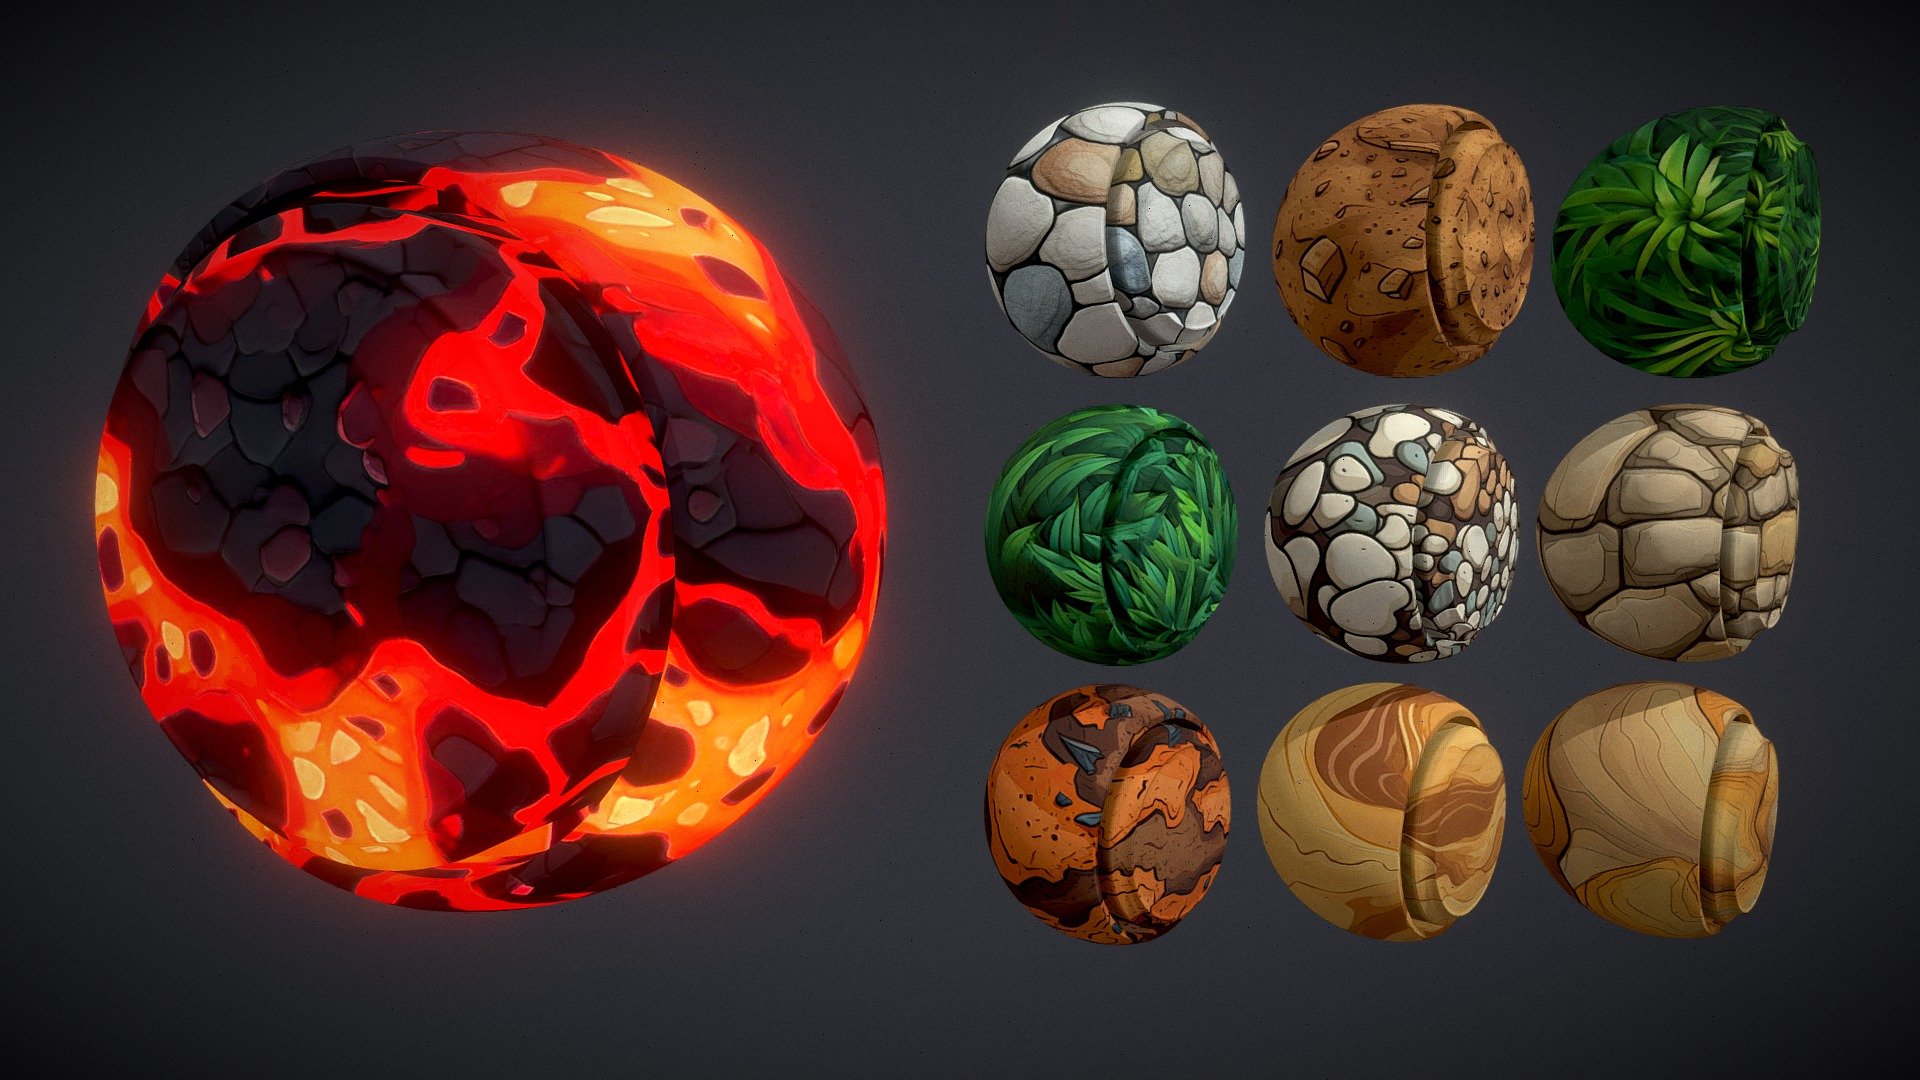 Link to Youtube

free material pack consisting of 10 stylized PBR materials for creating visually stunning 3D environments. This pack includes cobblestone, dirt, foliage, grass, gravel, lava, ore, sand, sandstone, and stone wall materials, all seamlessly tileable at 2048 resolution. Enhance the realism and appeal of your virtual projects with the included roughness, normal, ambient occlusion, displacement, and emission maps 3d model